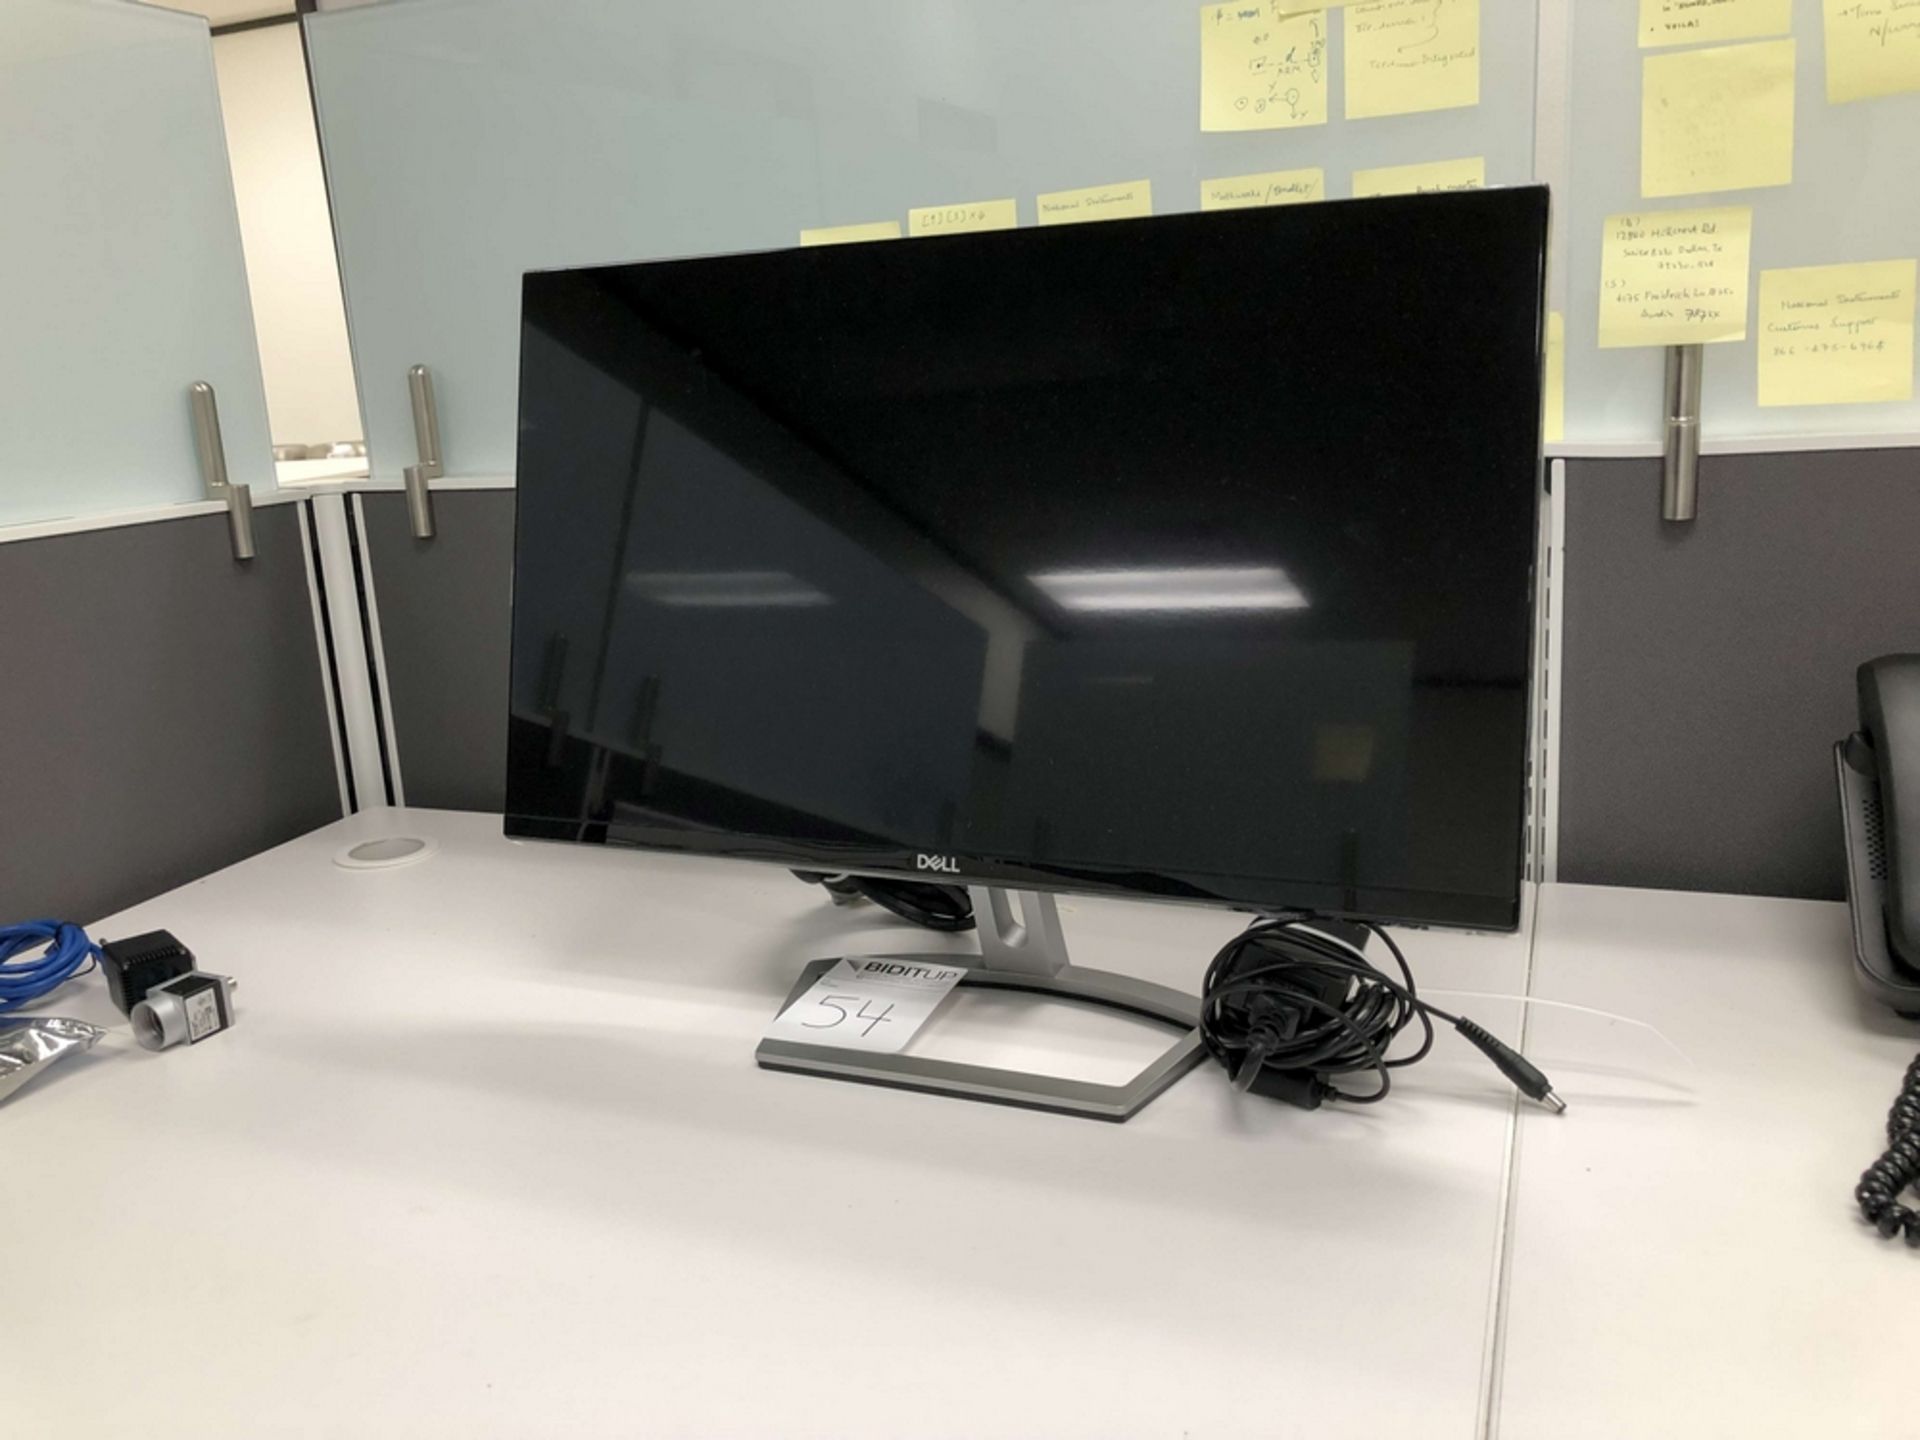 2017 Dell 23" Widescreen Flat-Panel IPS LED Monitor, Model S2318Nc